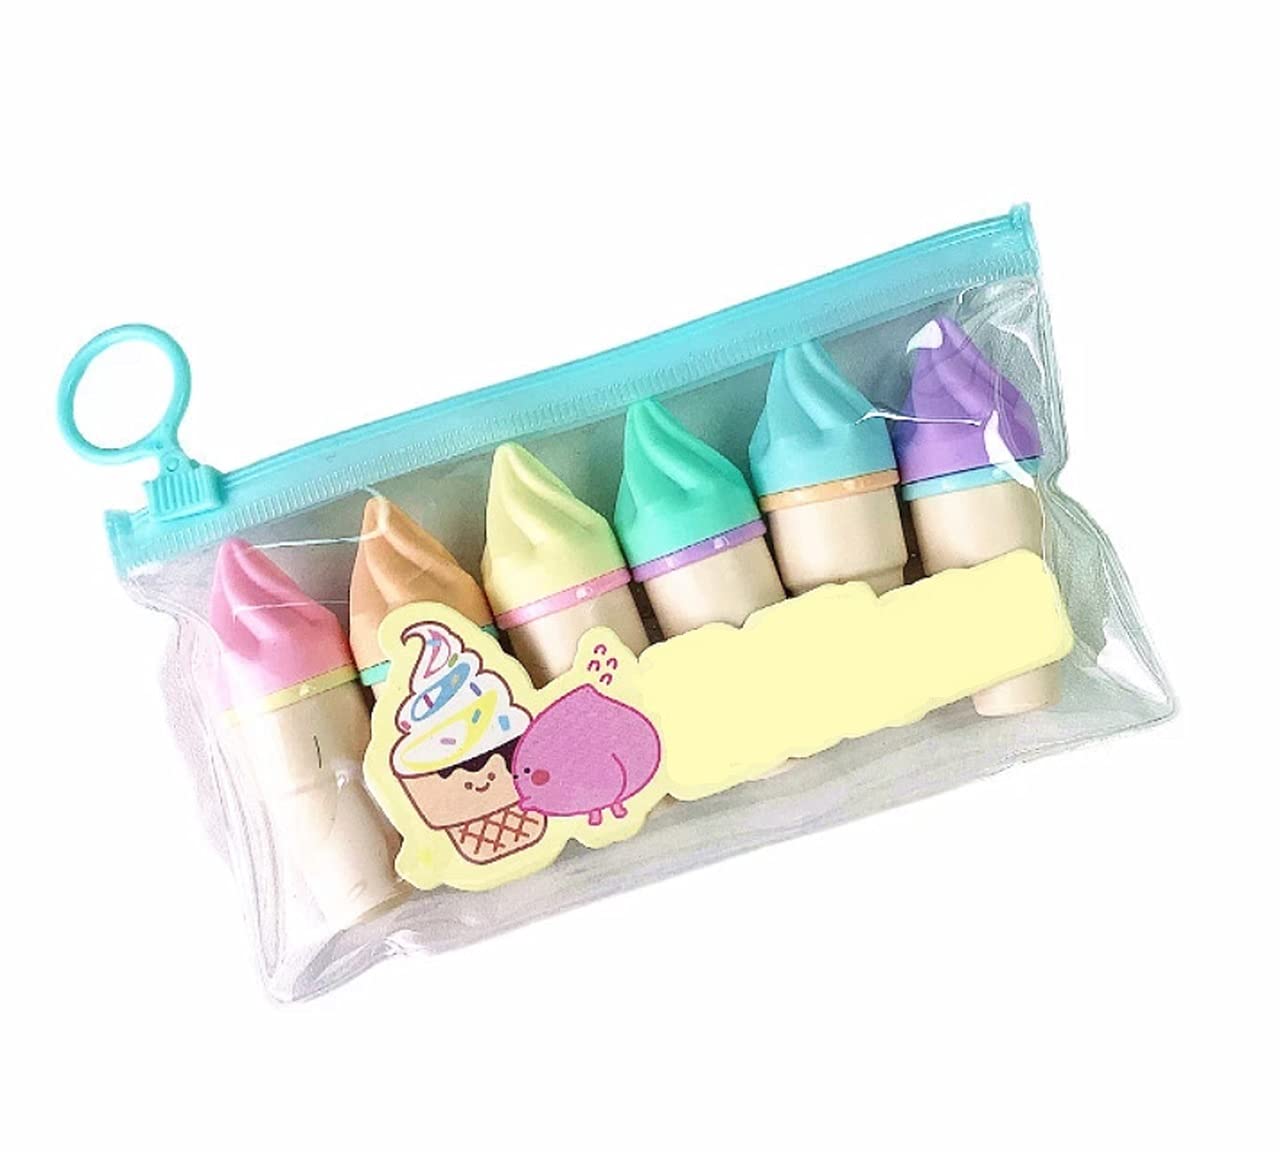 6 PCs/Set stationery cute shape Mini fluorescent highlighter marker pens for kids gift Pack of 1 (Ice Cream Cone)